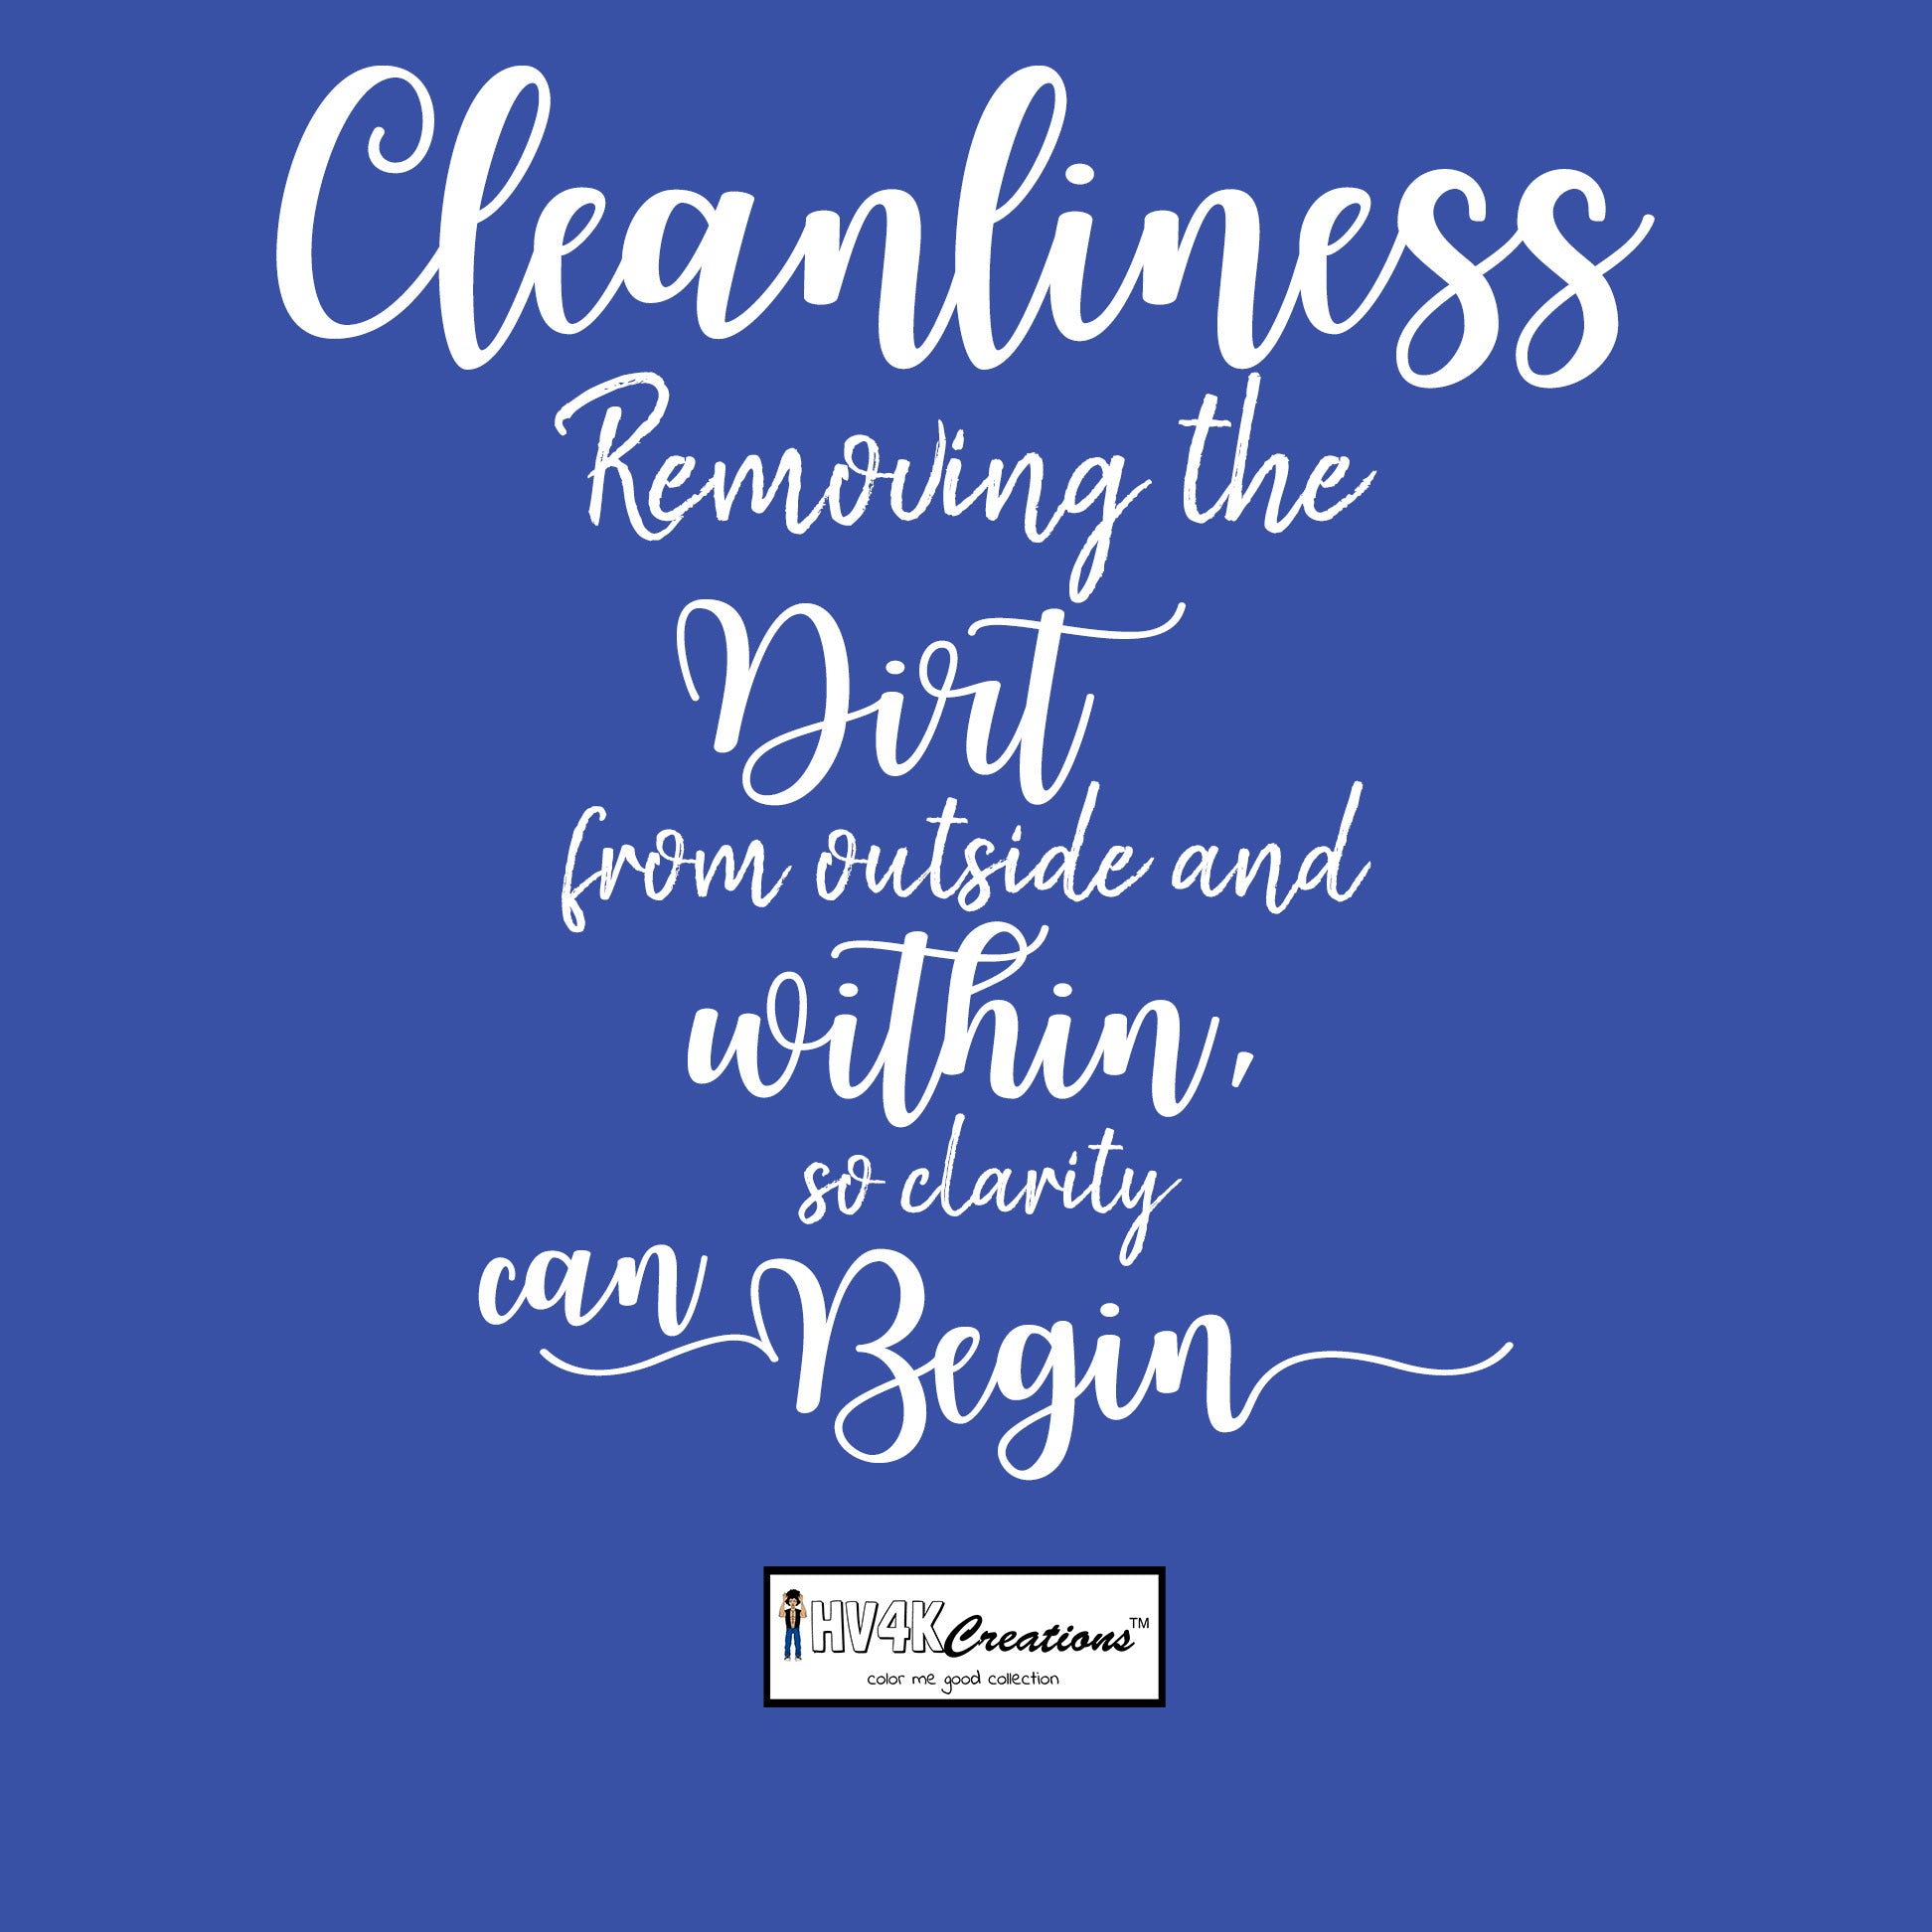 cleanliness rhyme picture